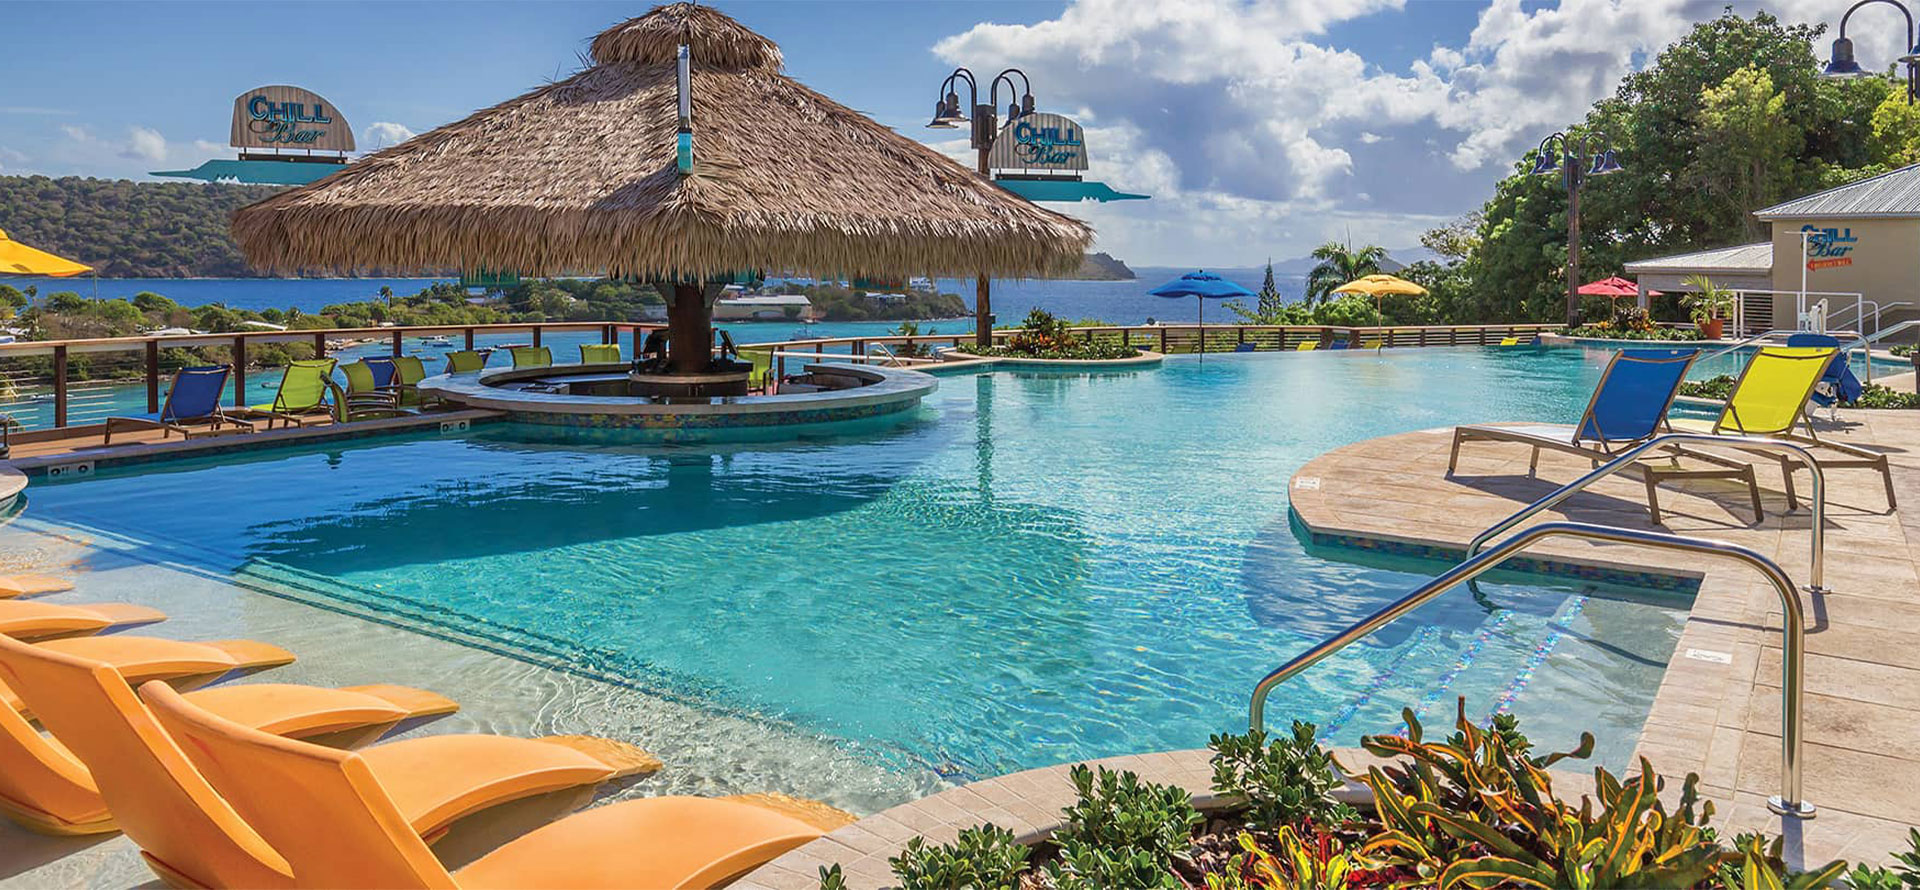 St thomas all-inclusive adults only resort with swimming pool and bar.